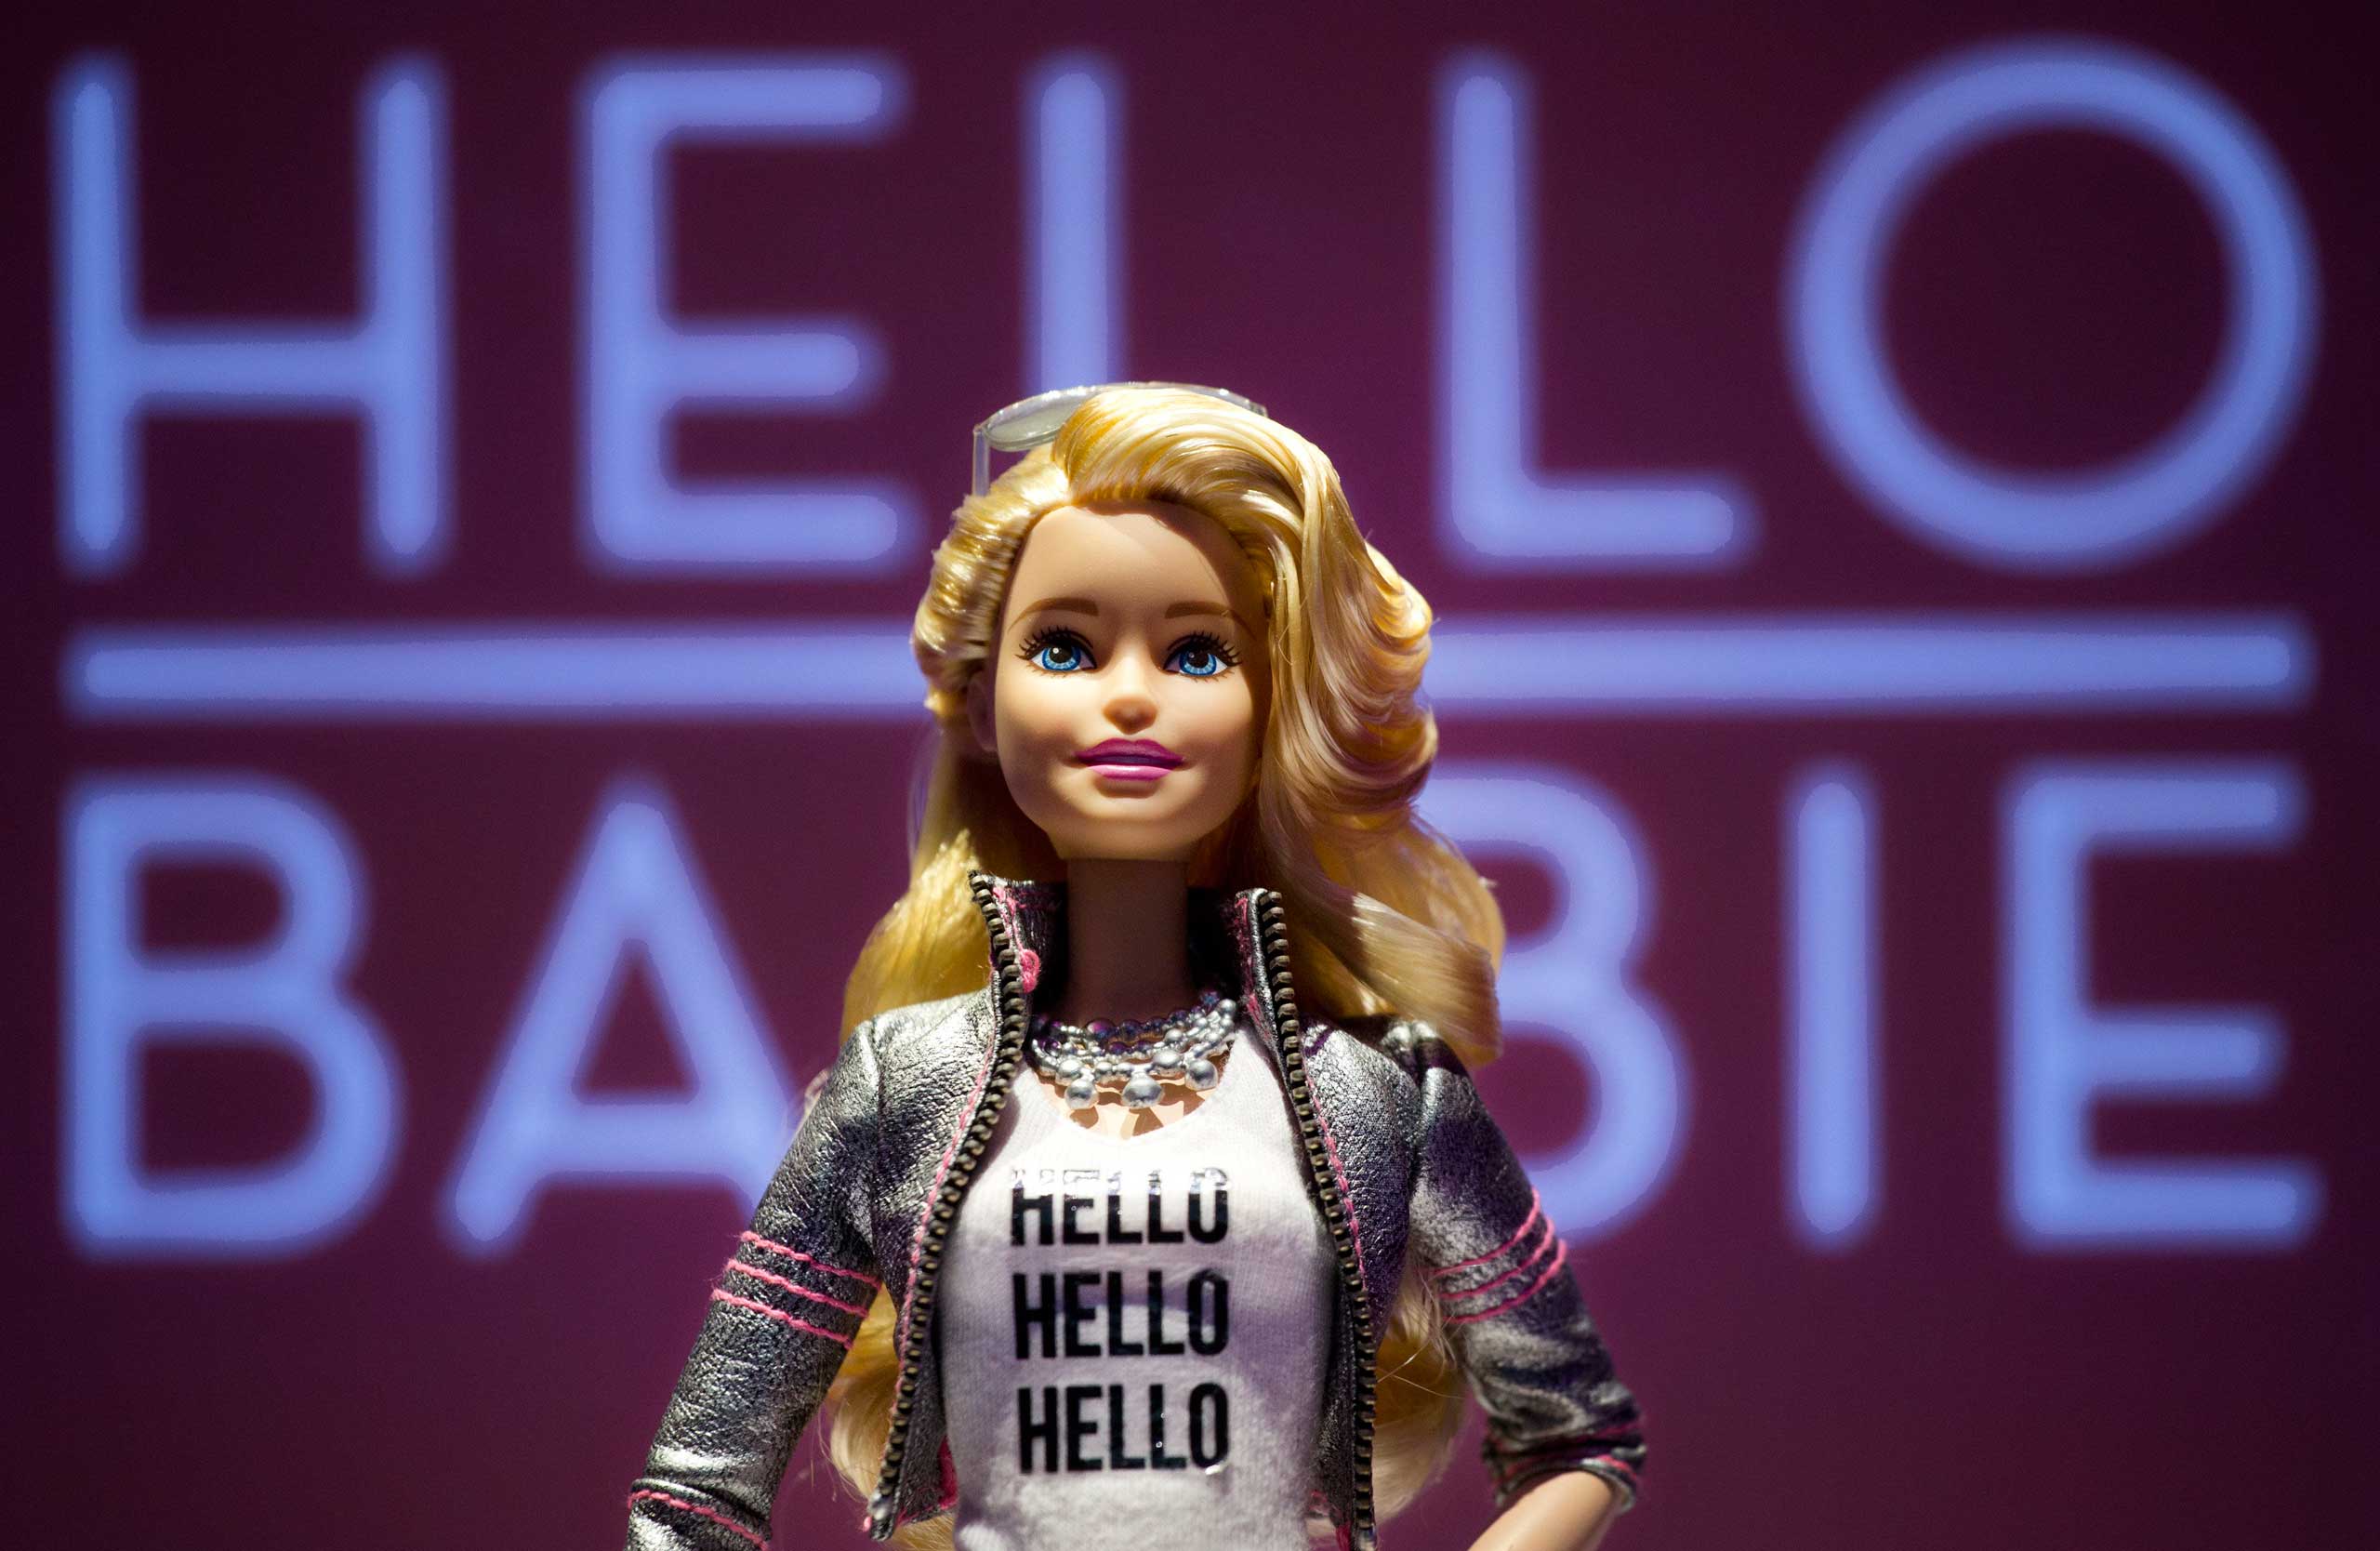 Hello Barbie is displayed at the Mattel showroom at the North American International Toy Fair in New York City on Feb. 14, 2015. (Mark Lennihan—AP)